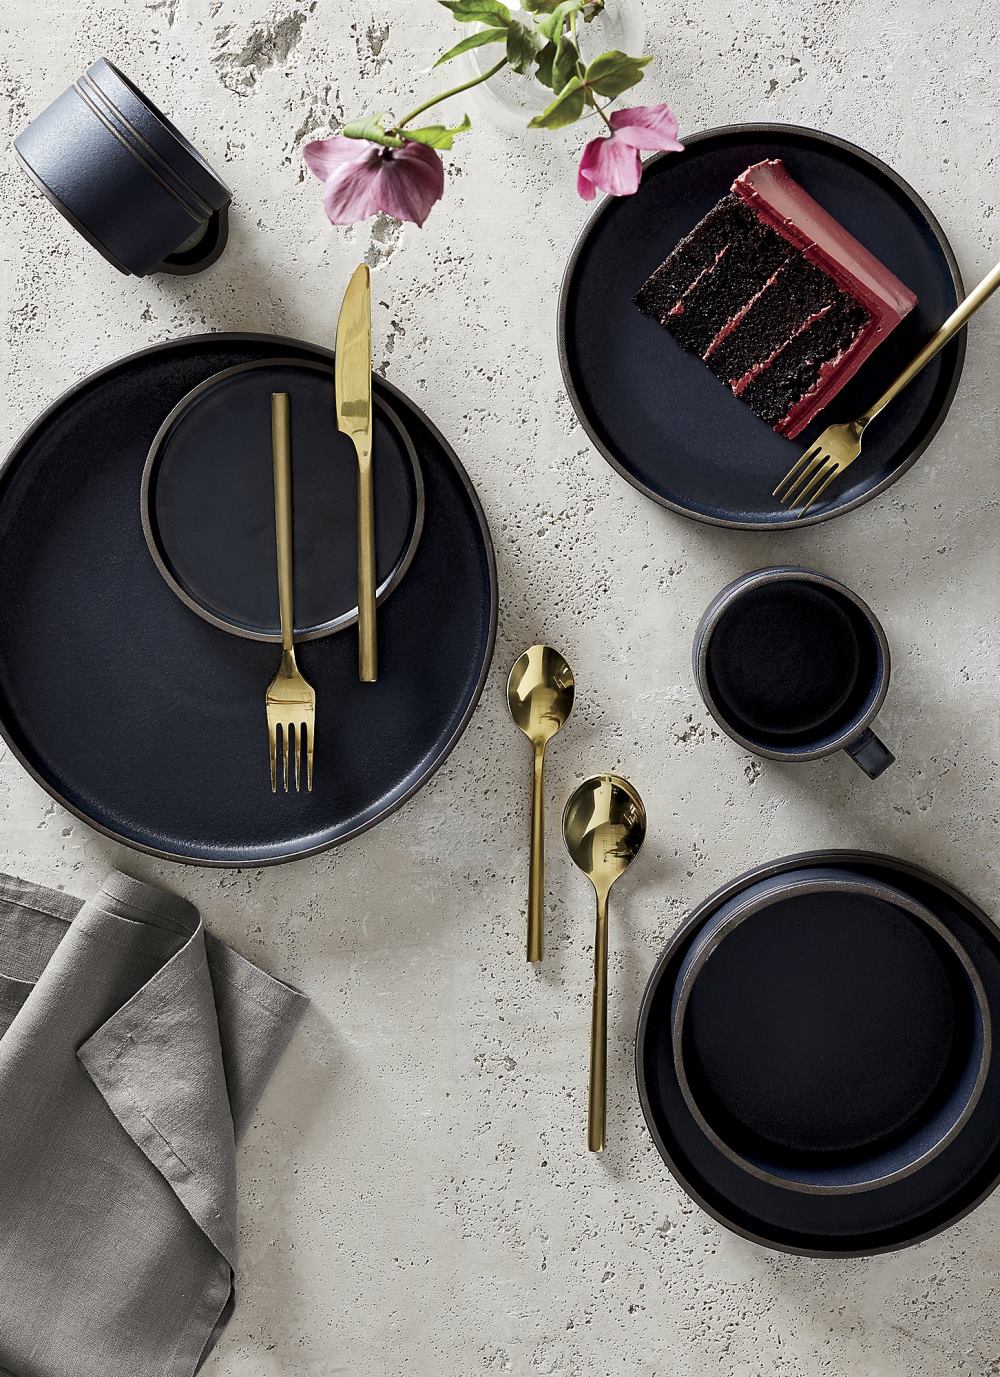 Dark-dishware-adds-decadence-and-depth-to-the-fall-table